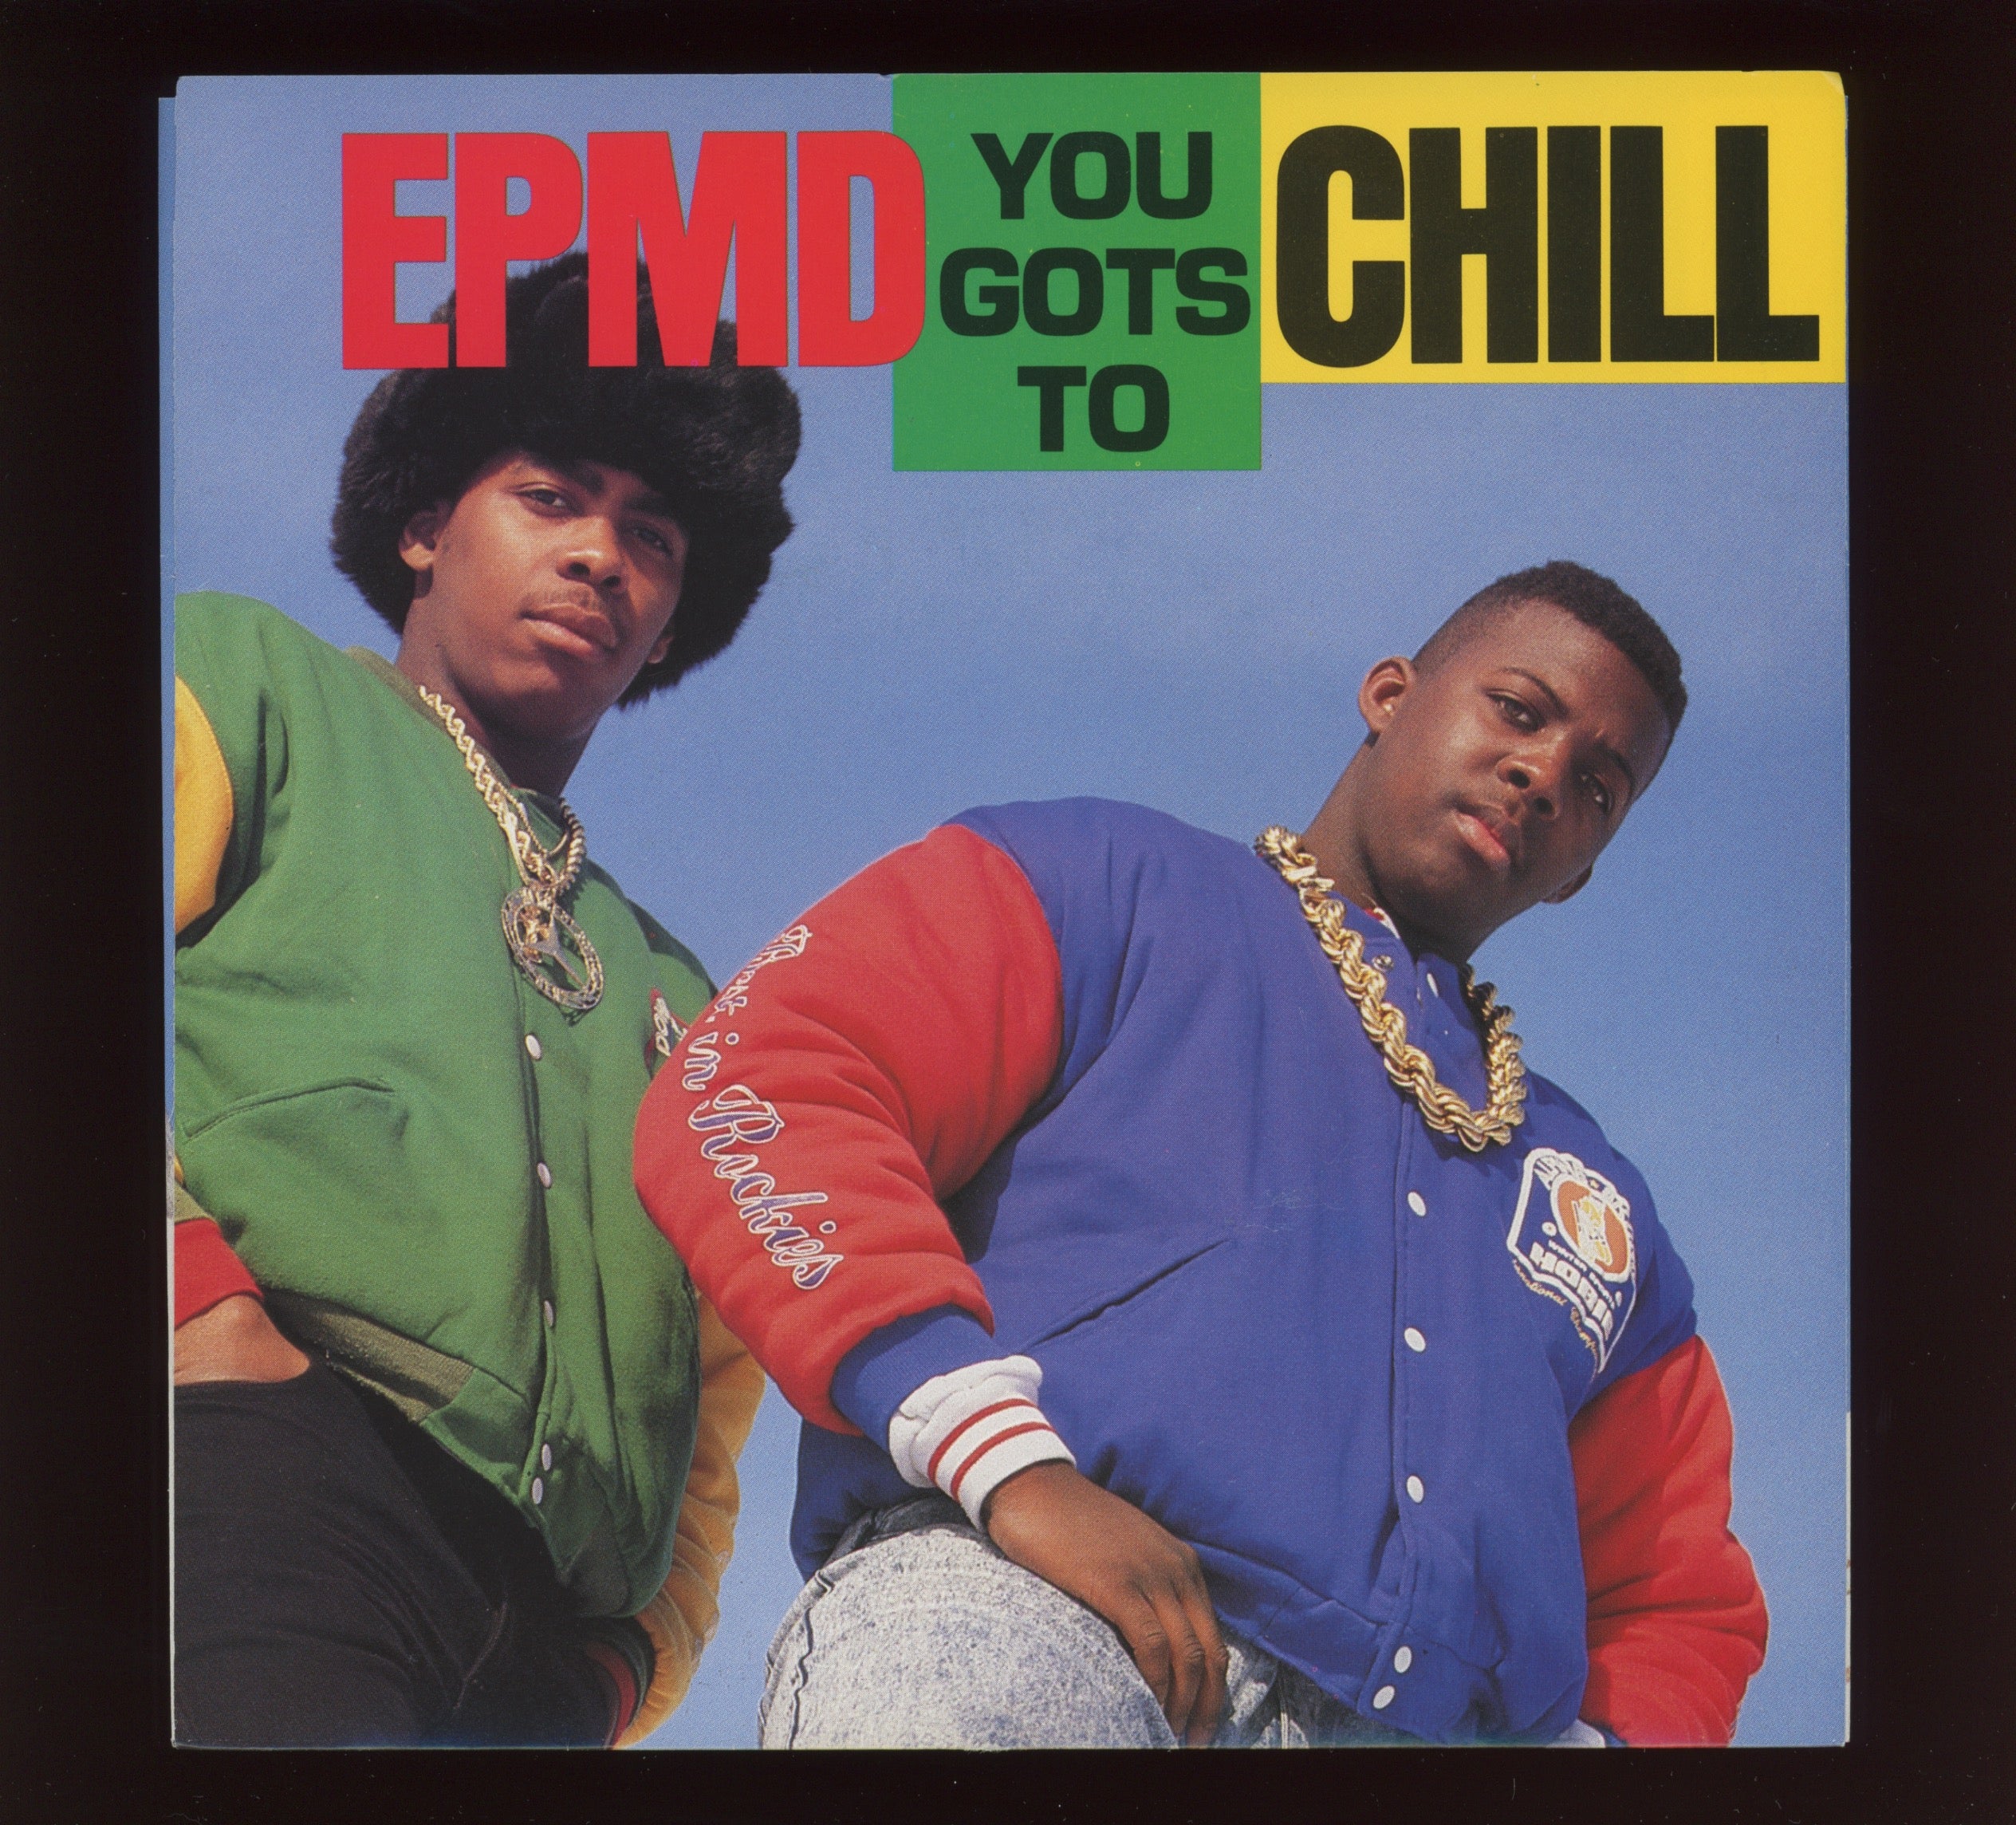 EPMD - You Gots To Chill on Sleeping Bag With Picture Sleeve